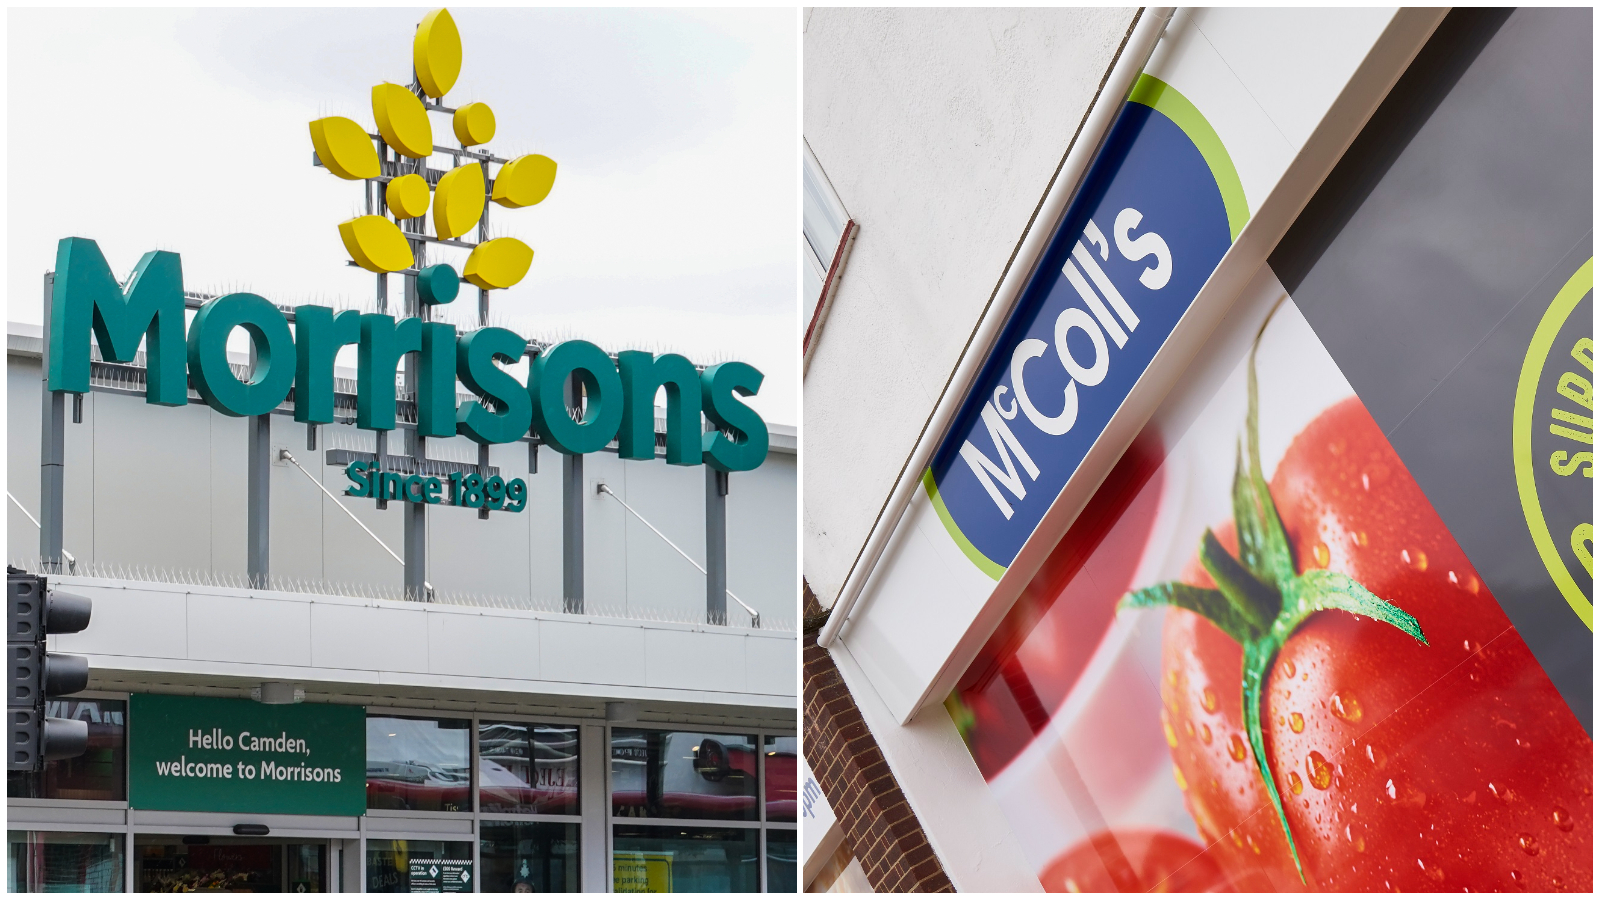 Morrisons launches last-minute bid to save troubled McColl’s | ITV News